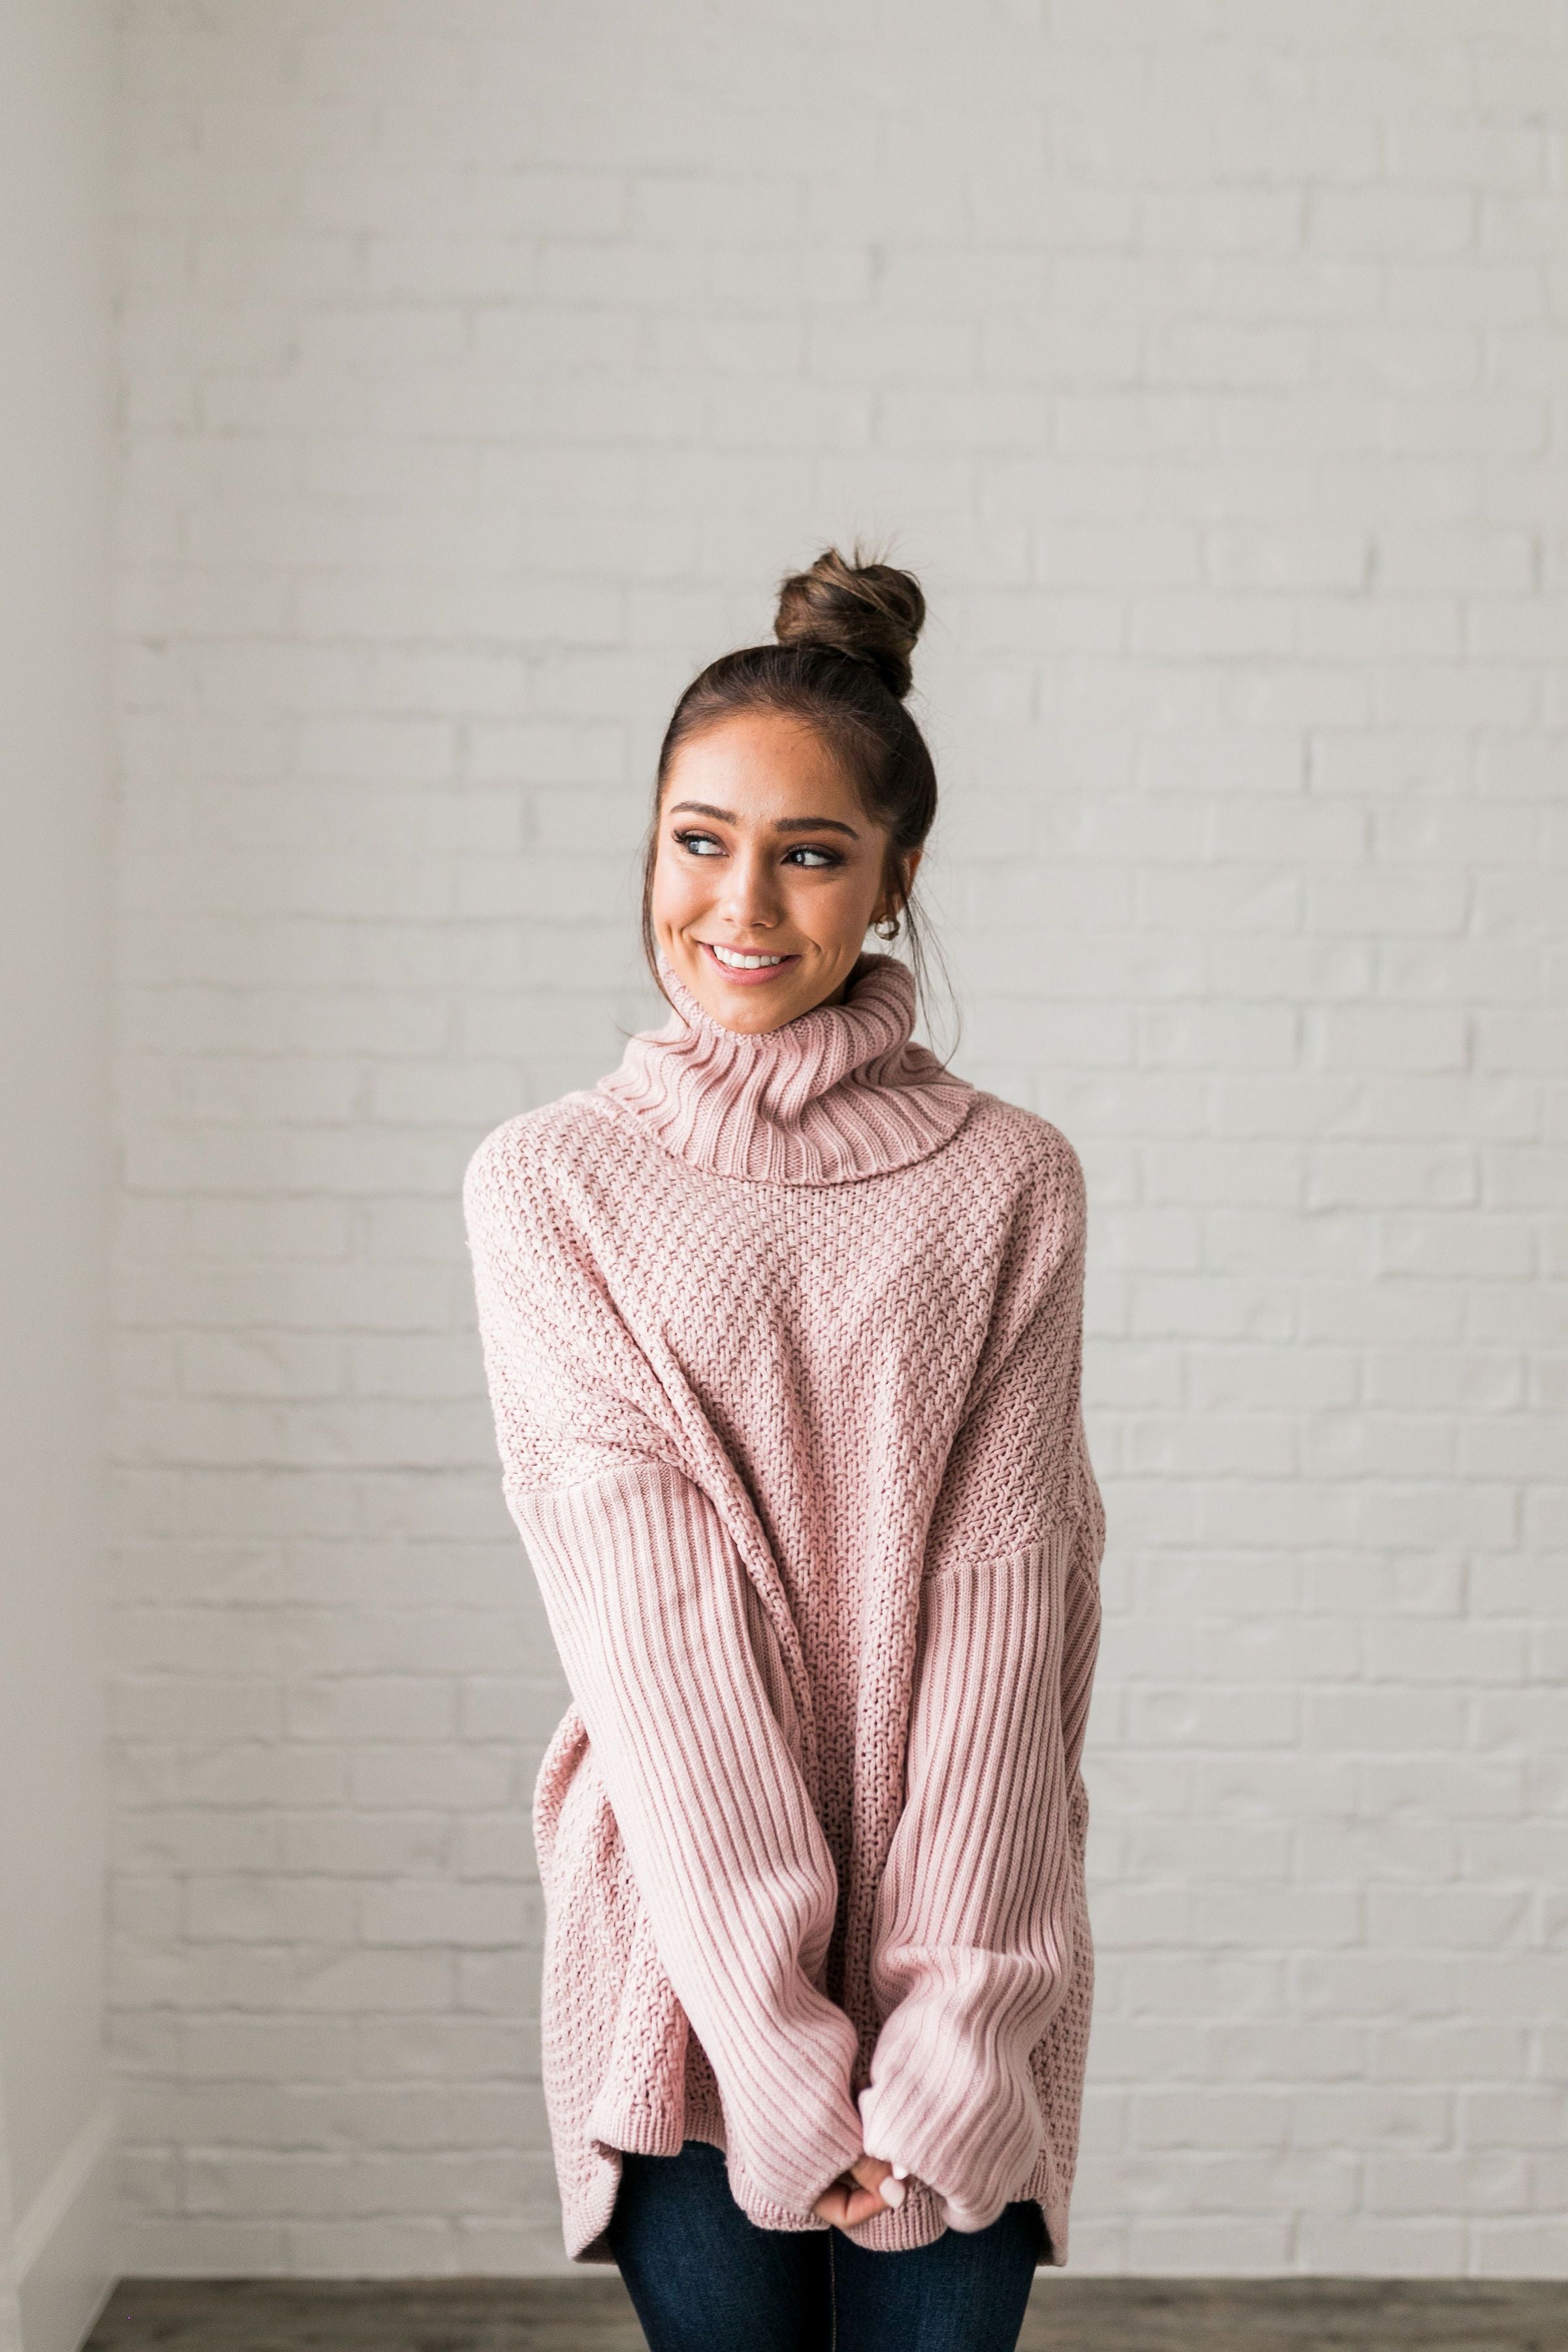 Chunky Cowl Neck Sweater - ALL SALES FINAL